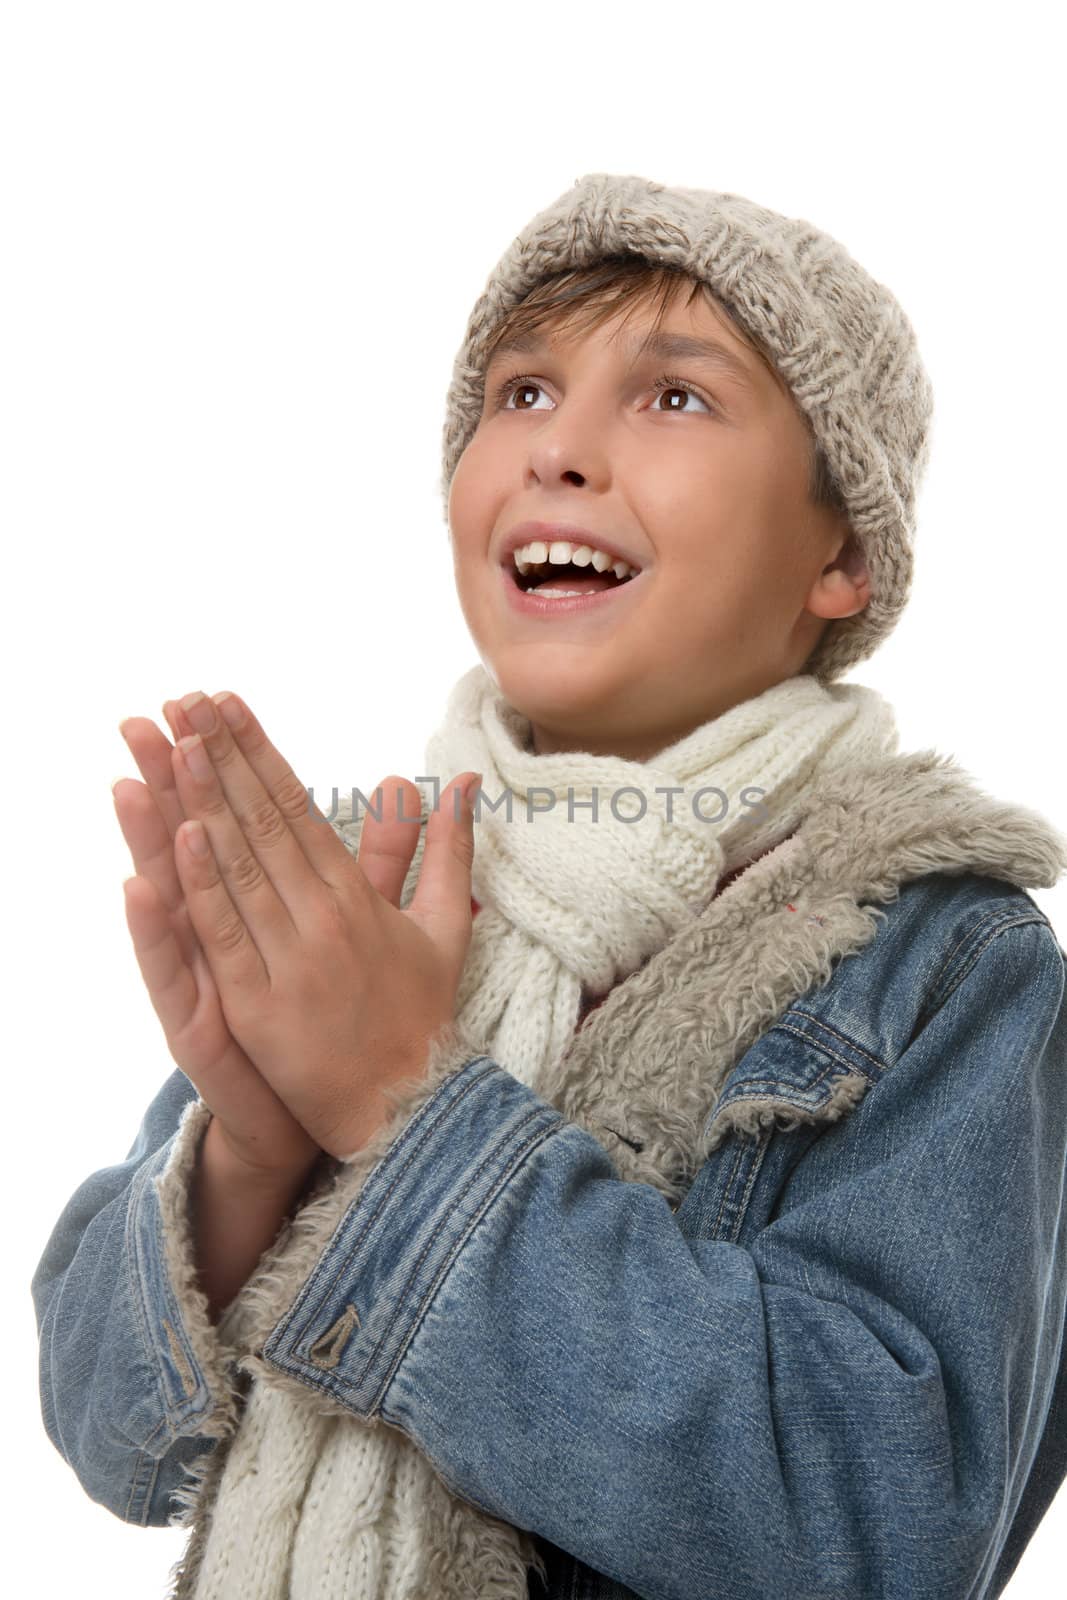 Young boy dressed in winter clothing looking up and smiling